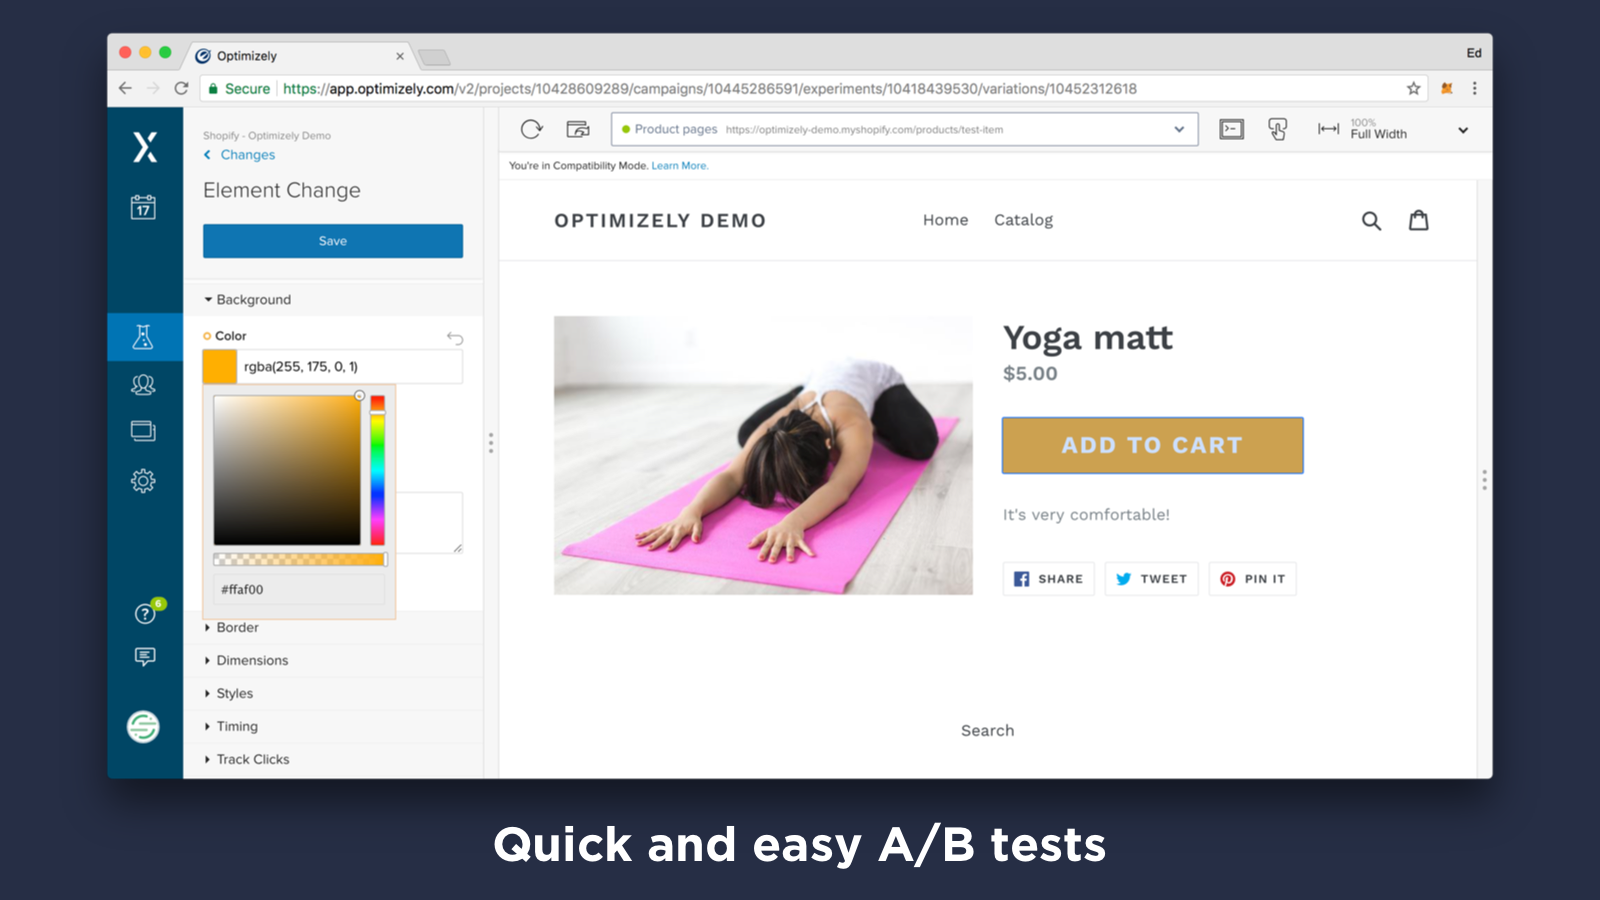 Quick and easy A/B tests